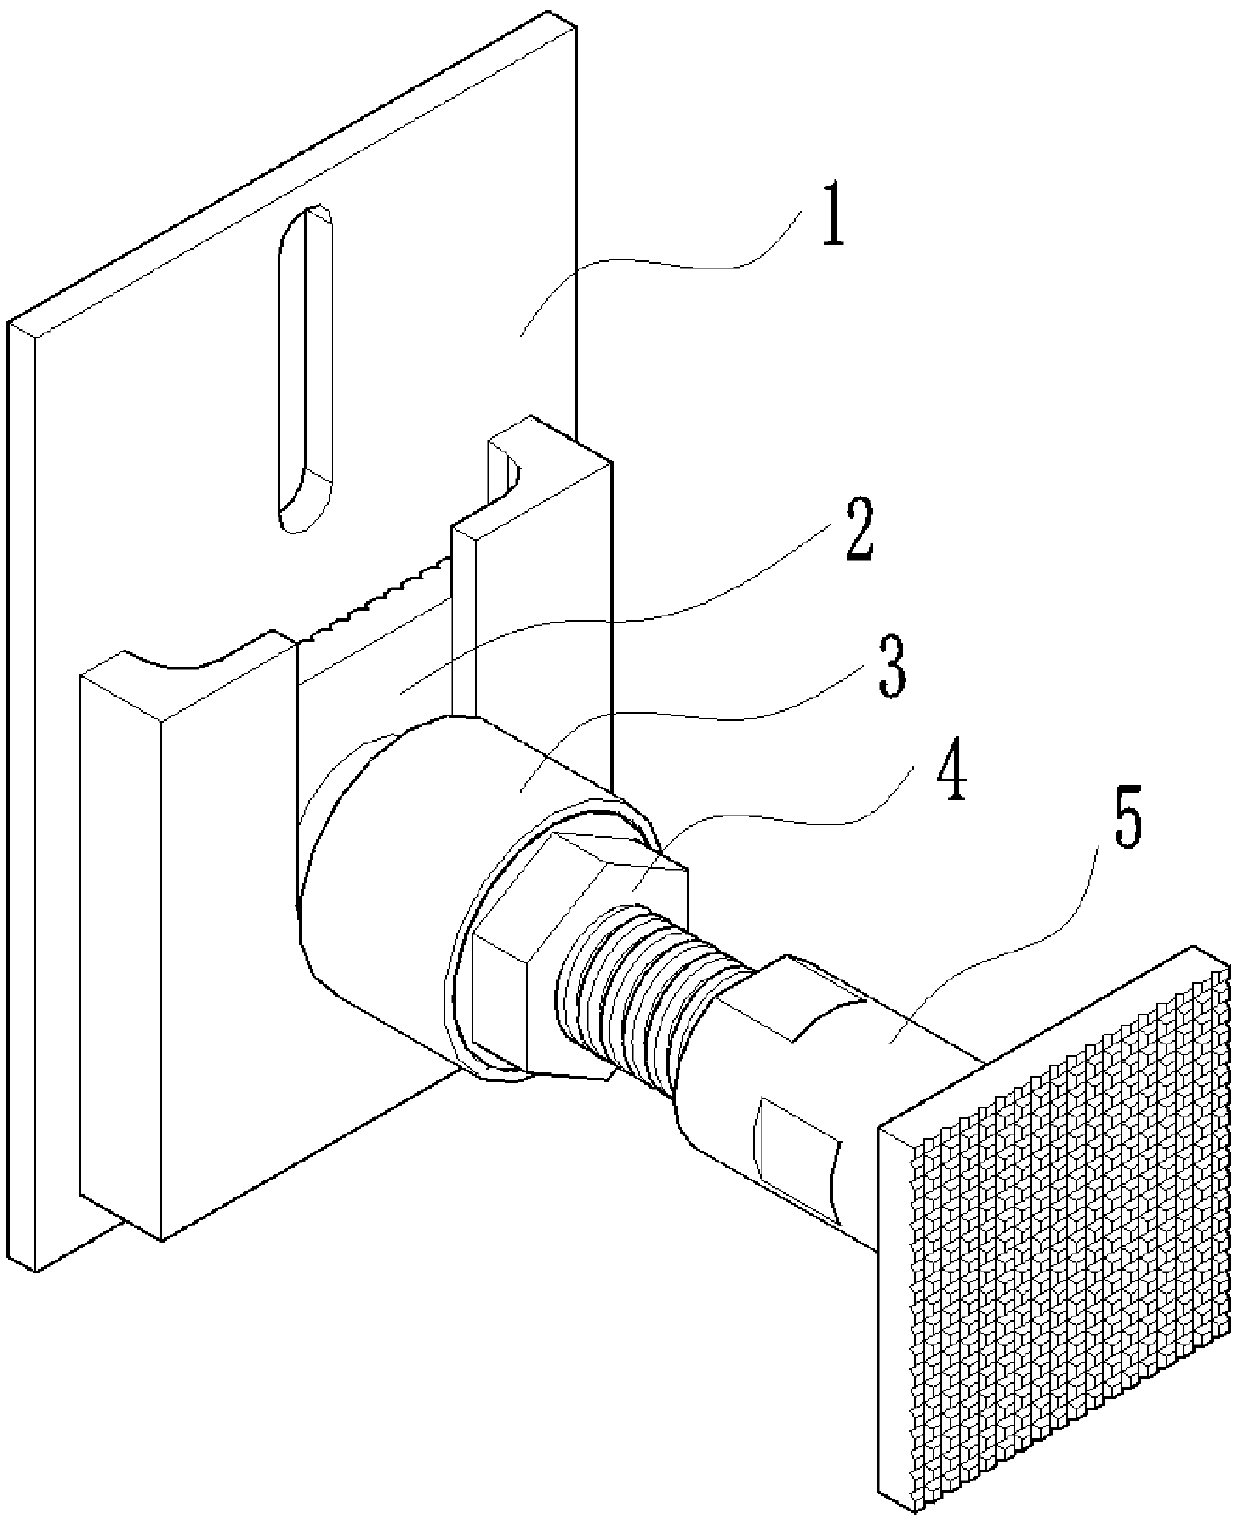 Clamping device for transverse deviation correction of ballastless track structure